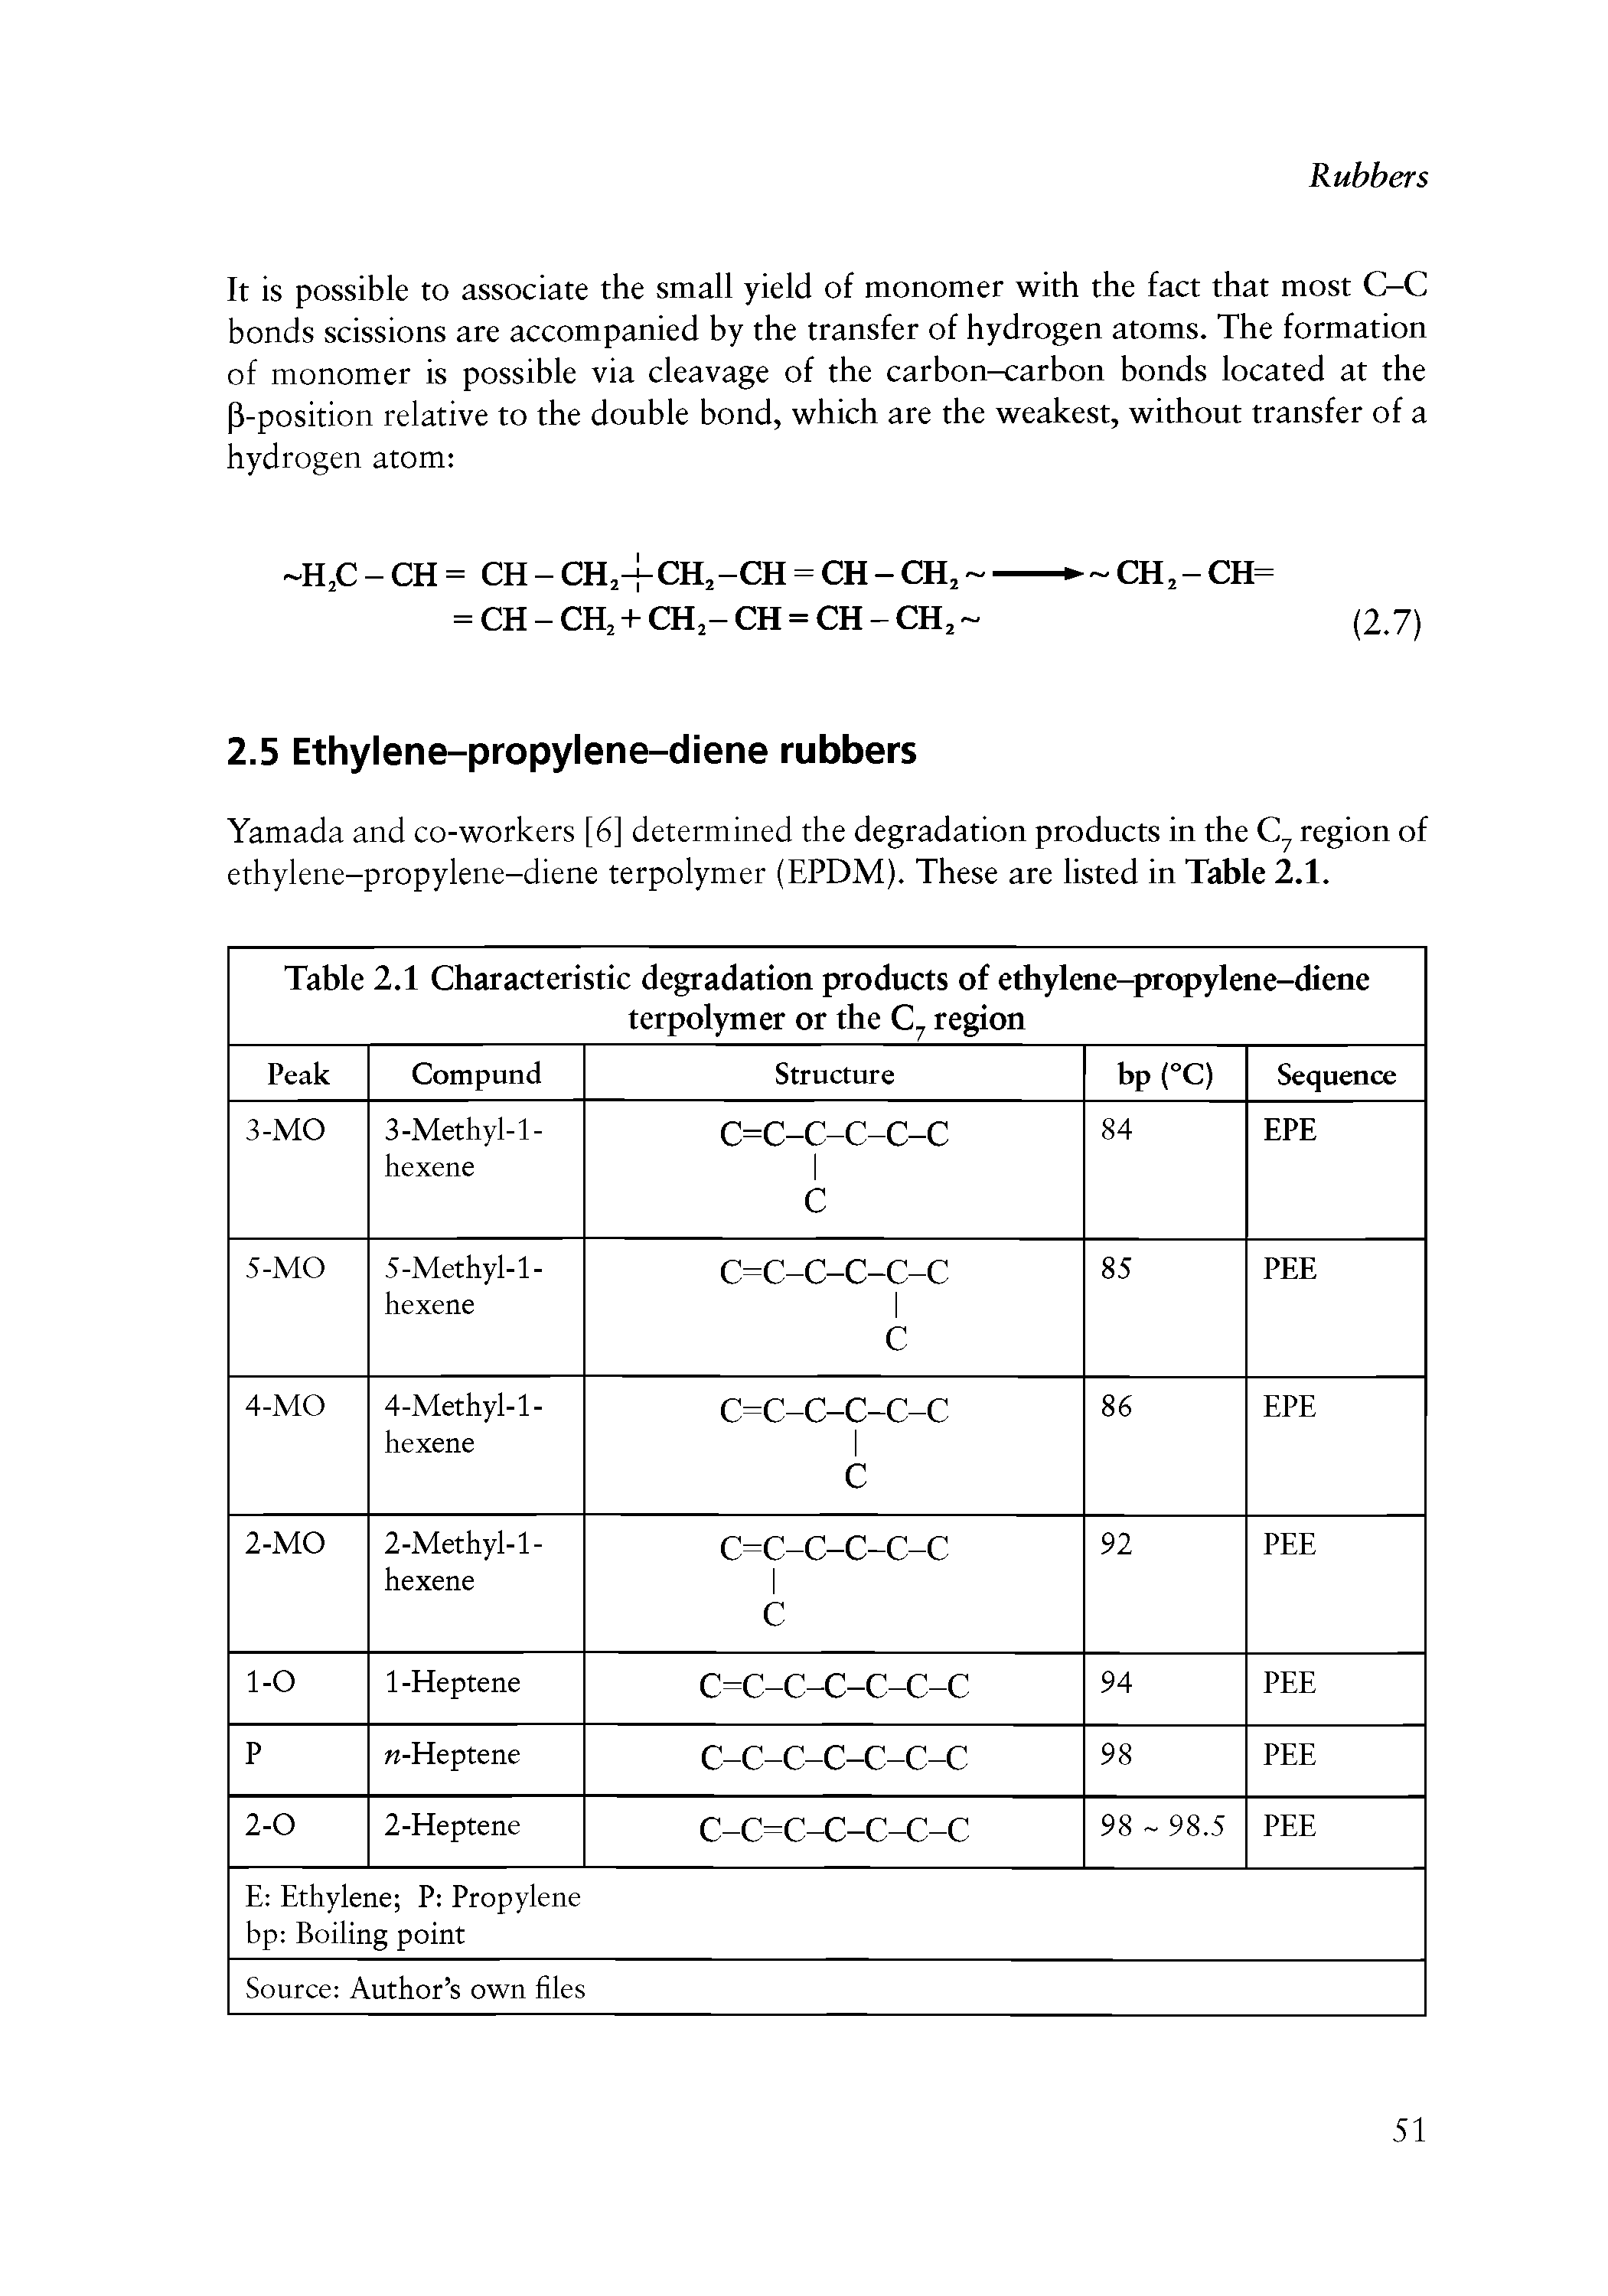 Table 2.1 Characteristic degradation products of ethylene-propylene-diene terpolymer or the region ...